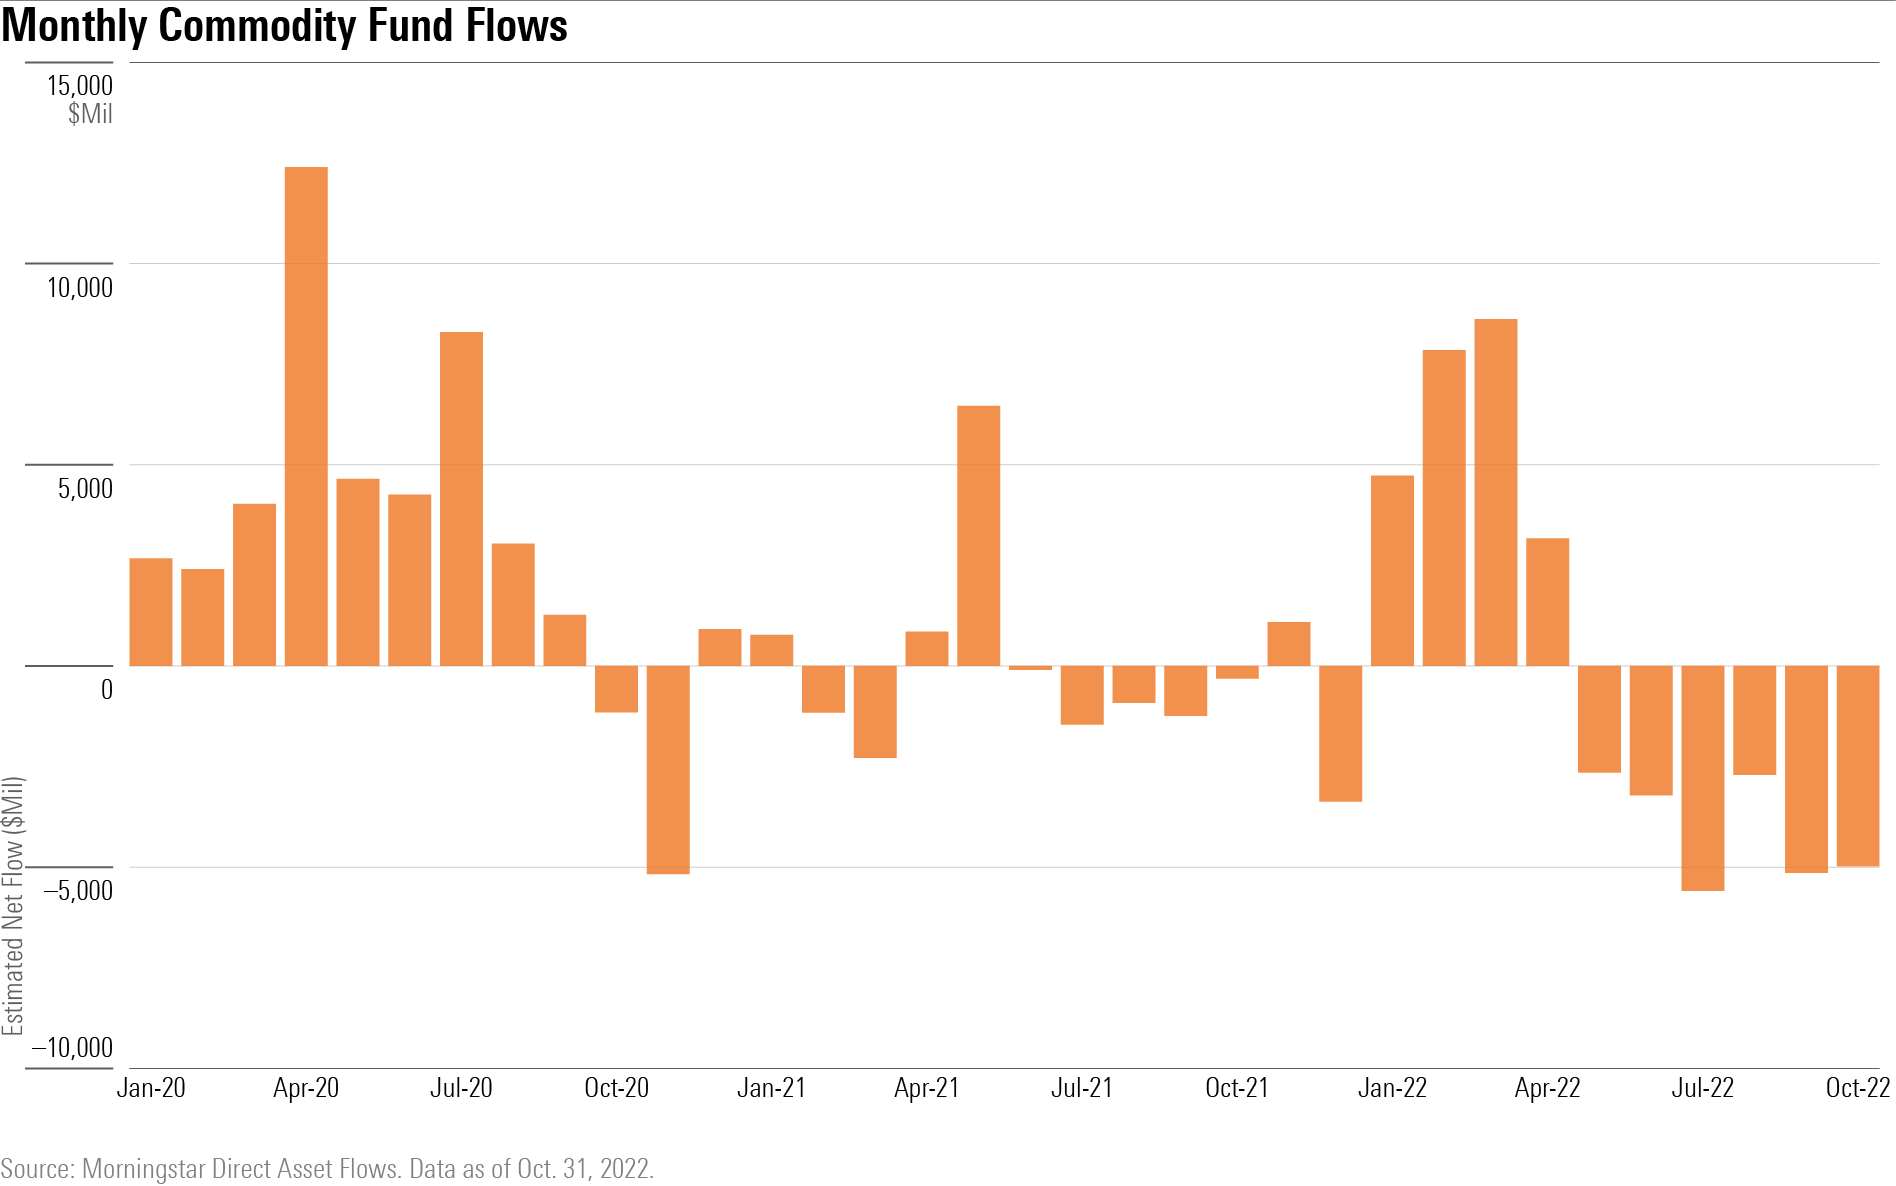 Commodities funds have had six consecutive months of outflows, the first such streak since 2013.